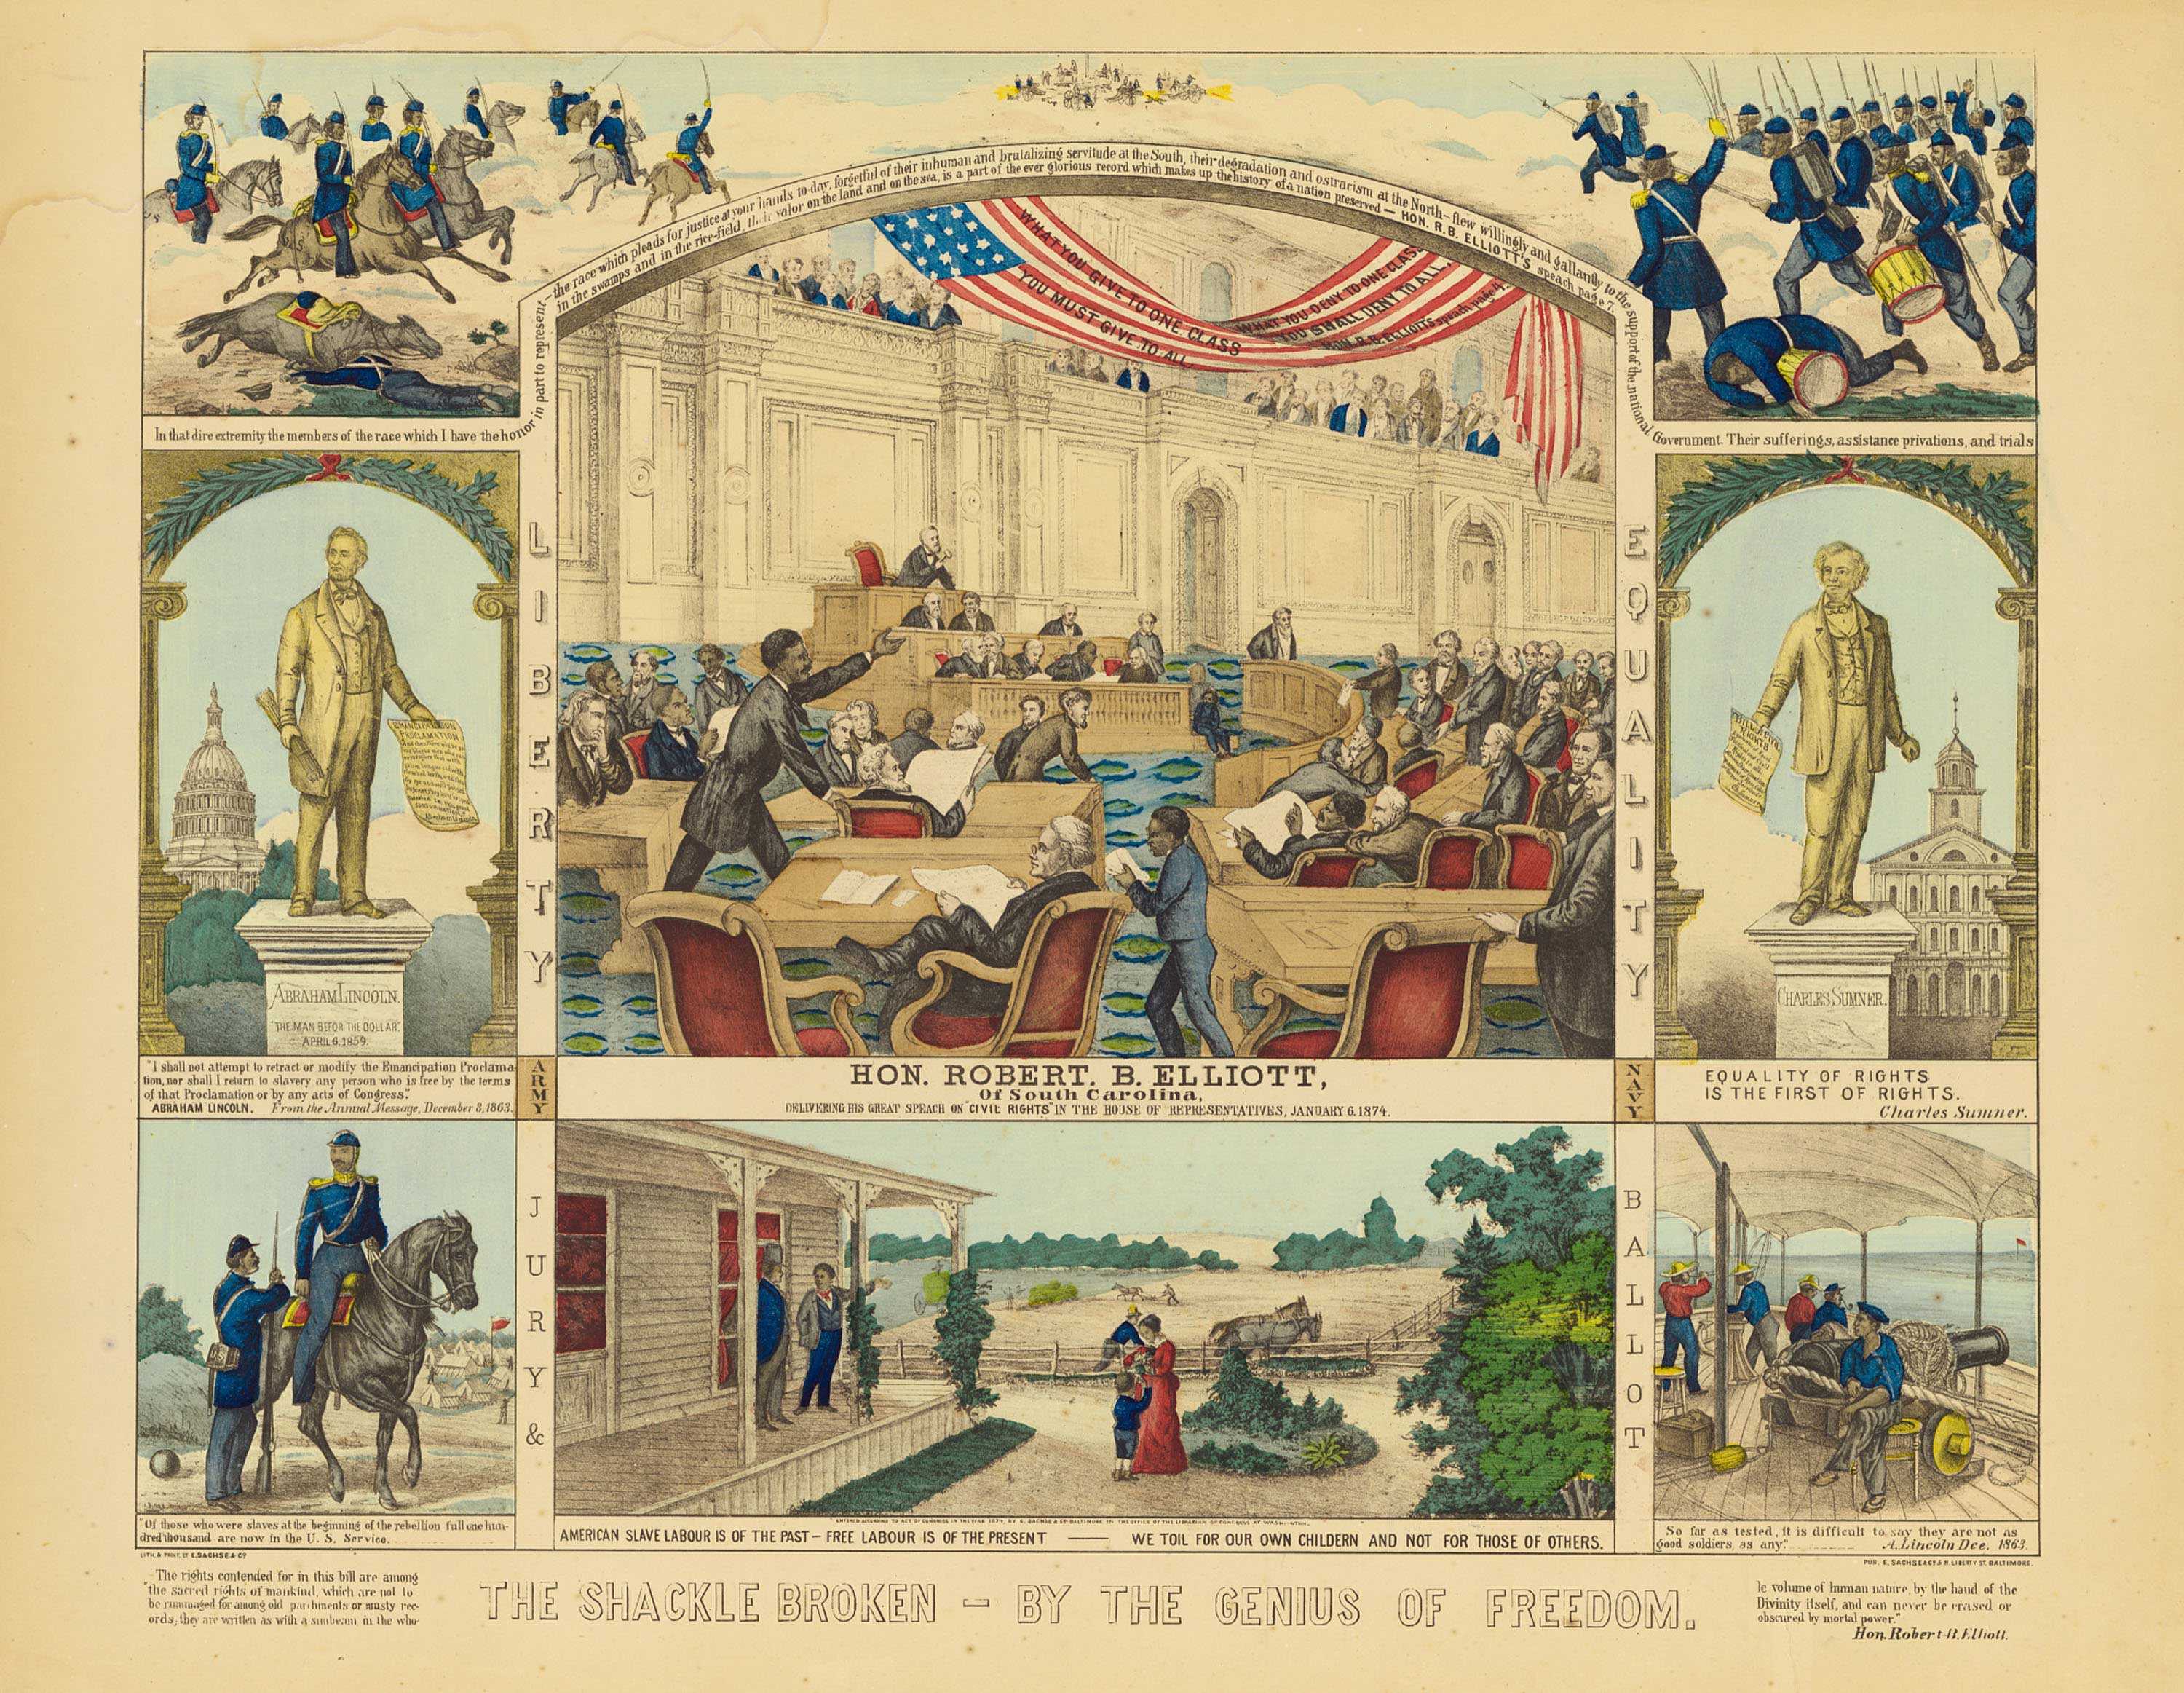 A series of colored drawings depicting key people and moments in advocating and fighting for civil rights.